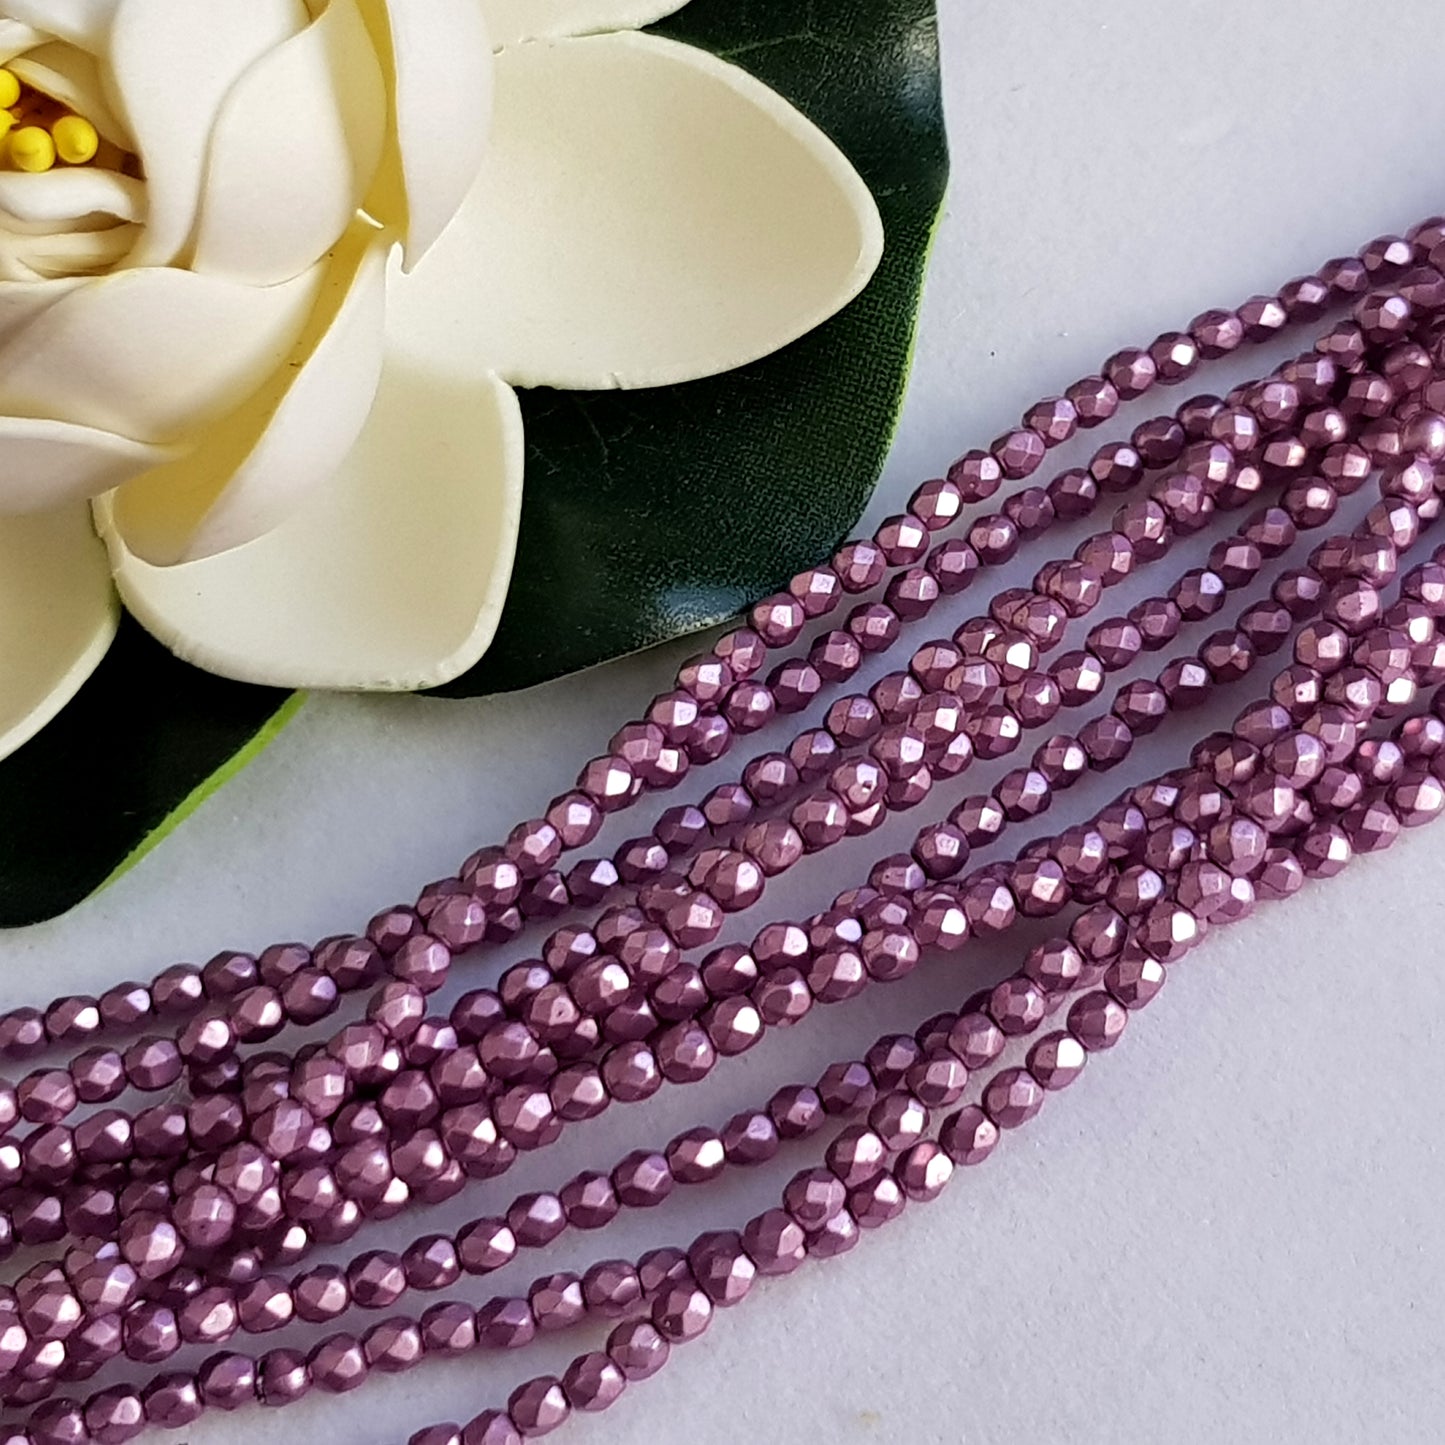 Czech Fire Polished 50 Bead Strand - Suede Gold Orchid 3mm Round Faceted  |  FP-08A03-CB-03 | Beading Supply